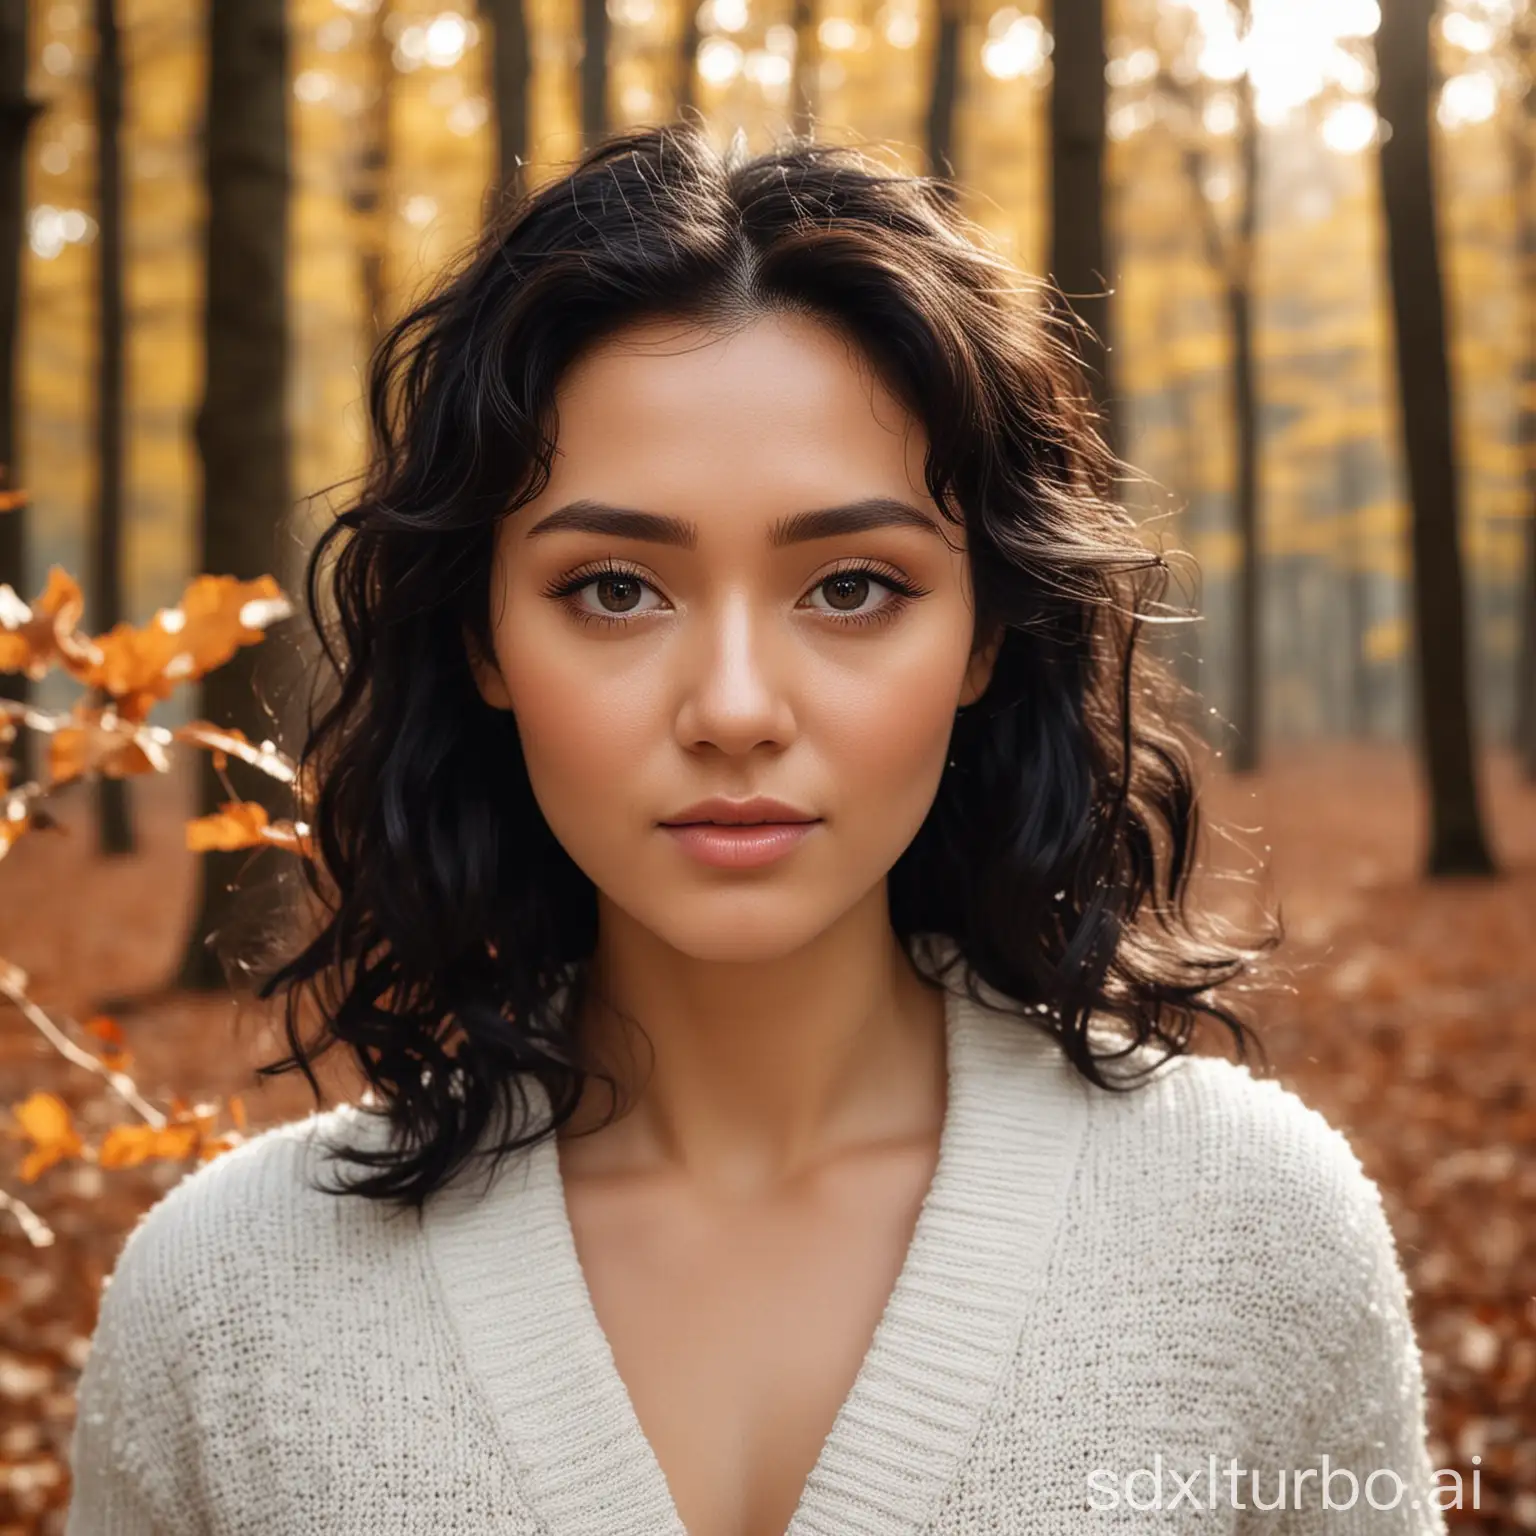 A woman wearing a white knitted cardigan coats and looks at the camera, with black shiny hair, slightly curly, clean makeup, breeze, brawn woods and fallen leaves, hazy feeling, blurred background, Canon shot, portrait photo, style reference gongli